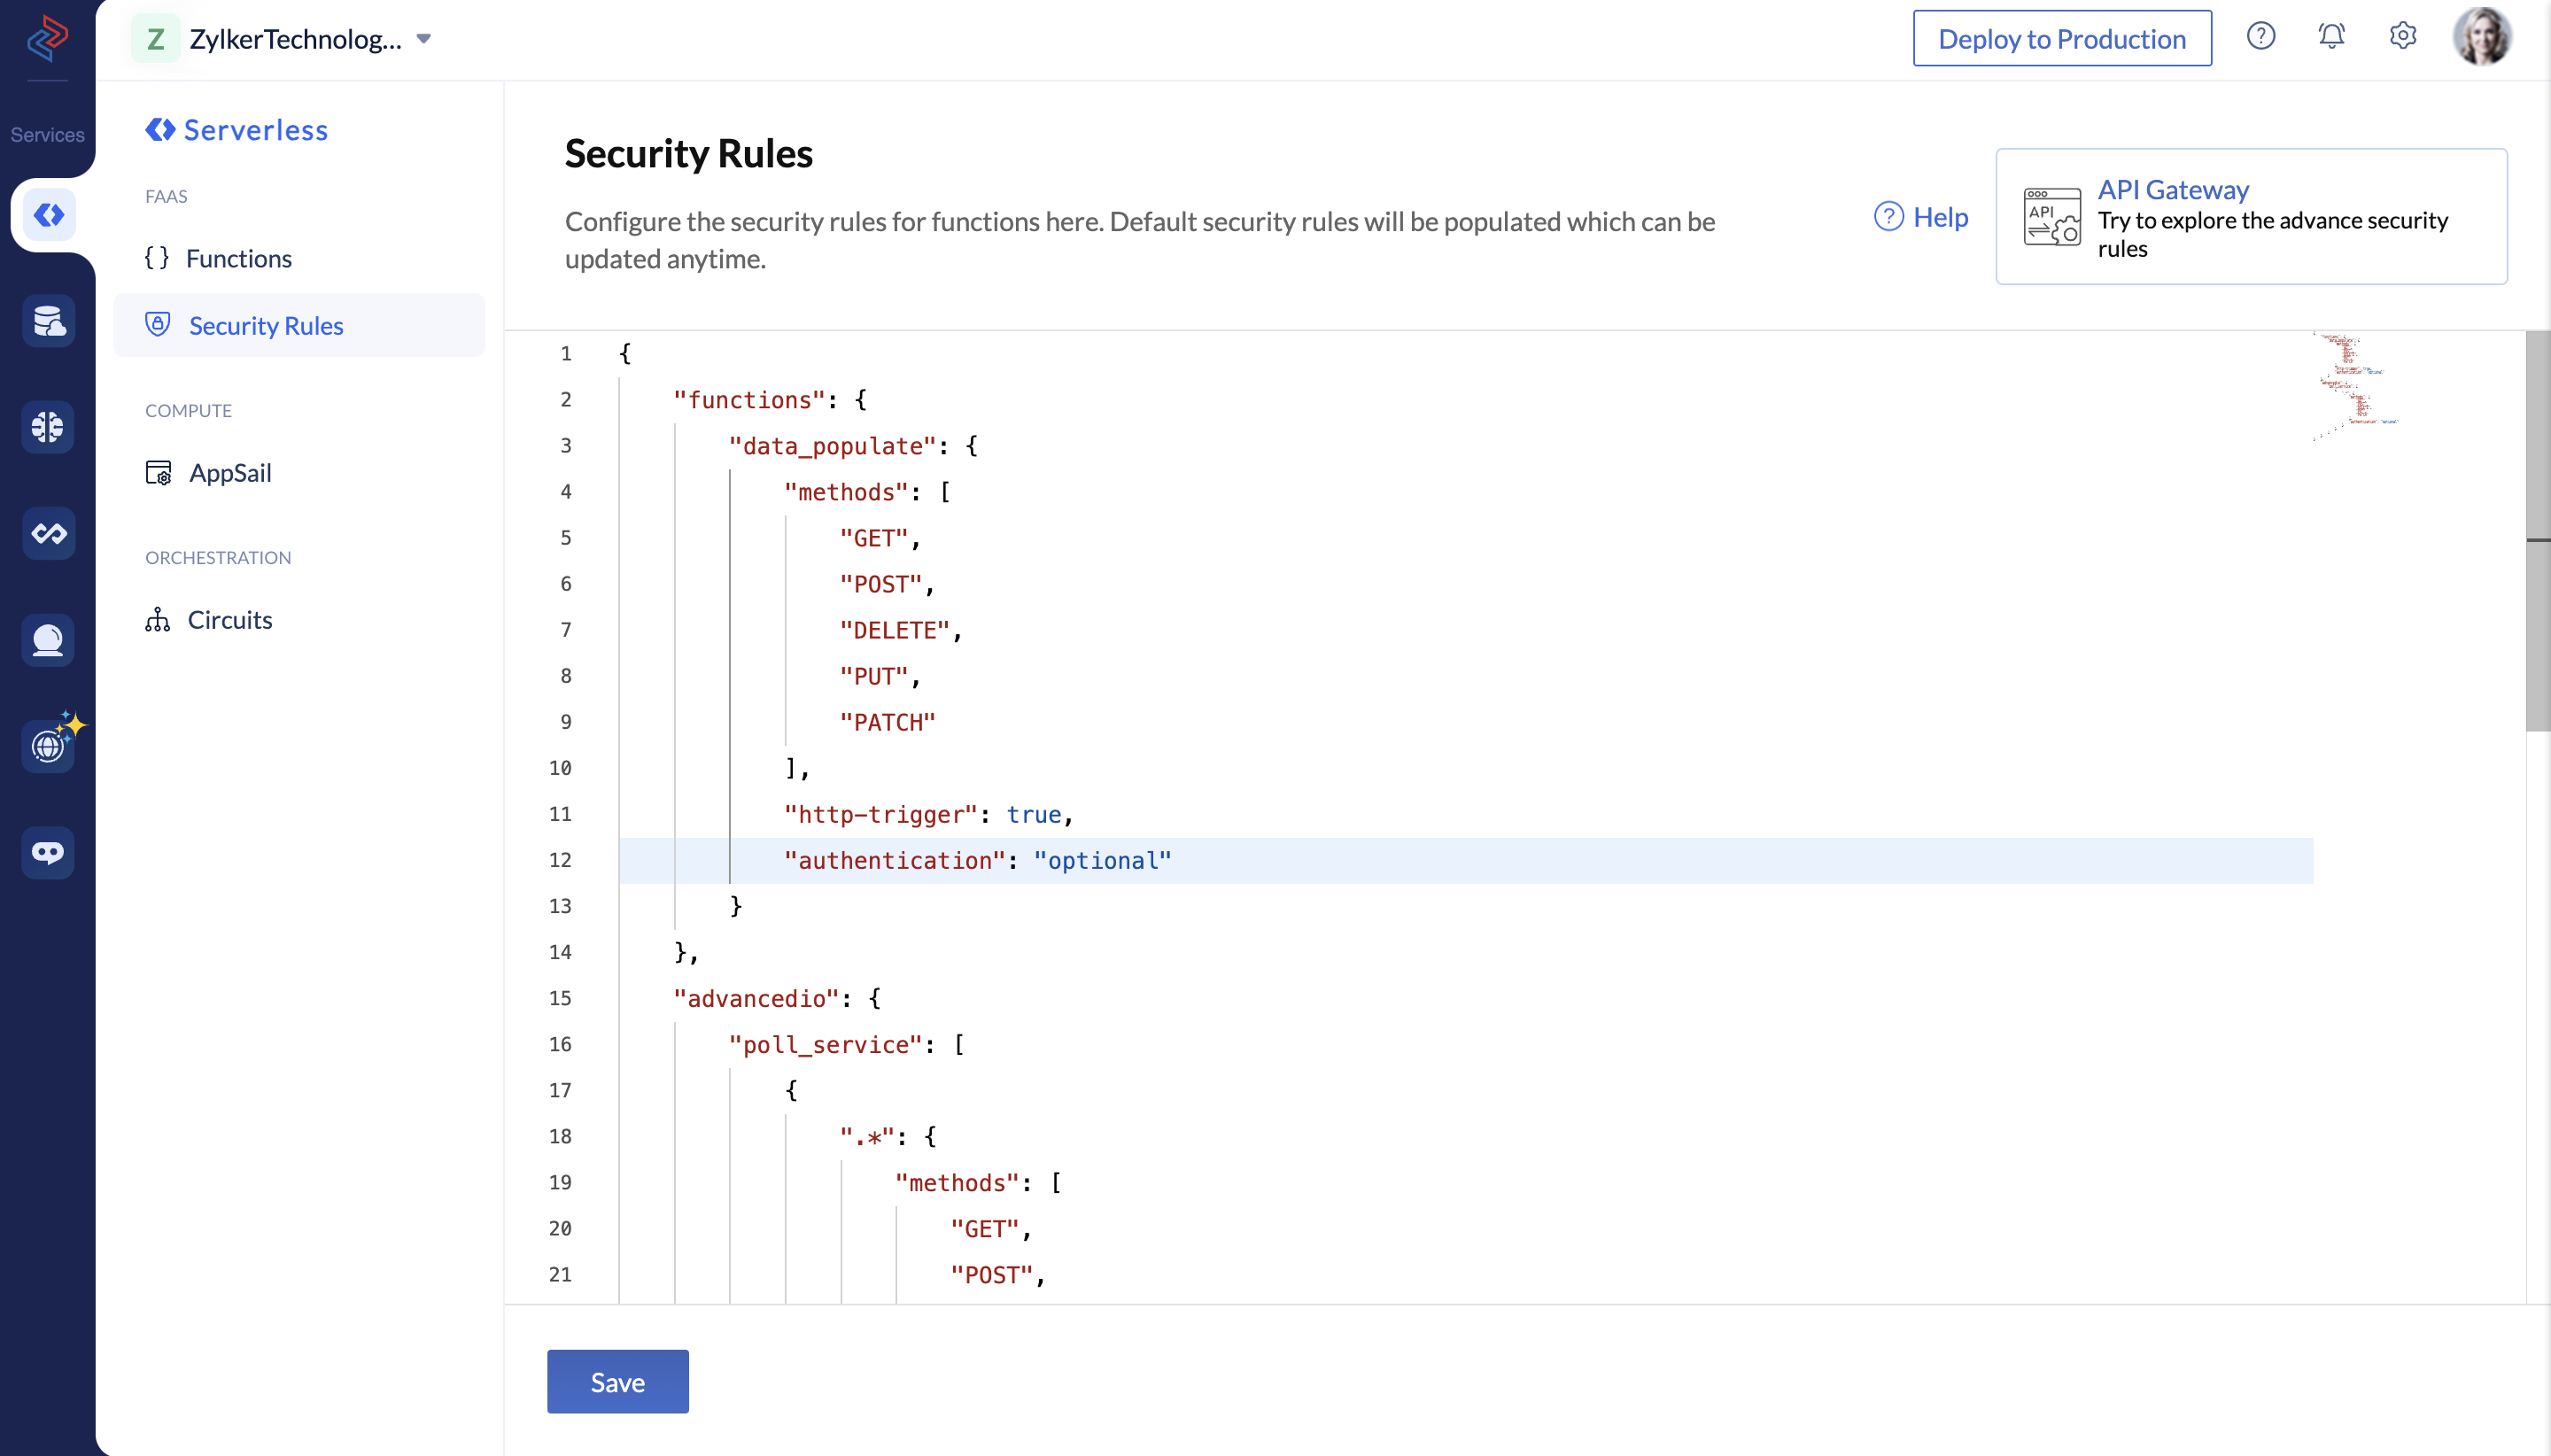 Security Rules- Modify Security Definitions